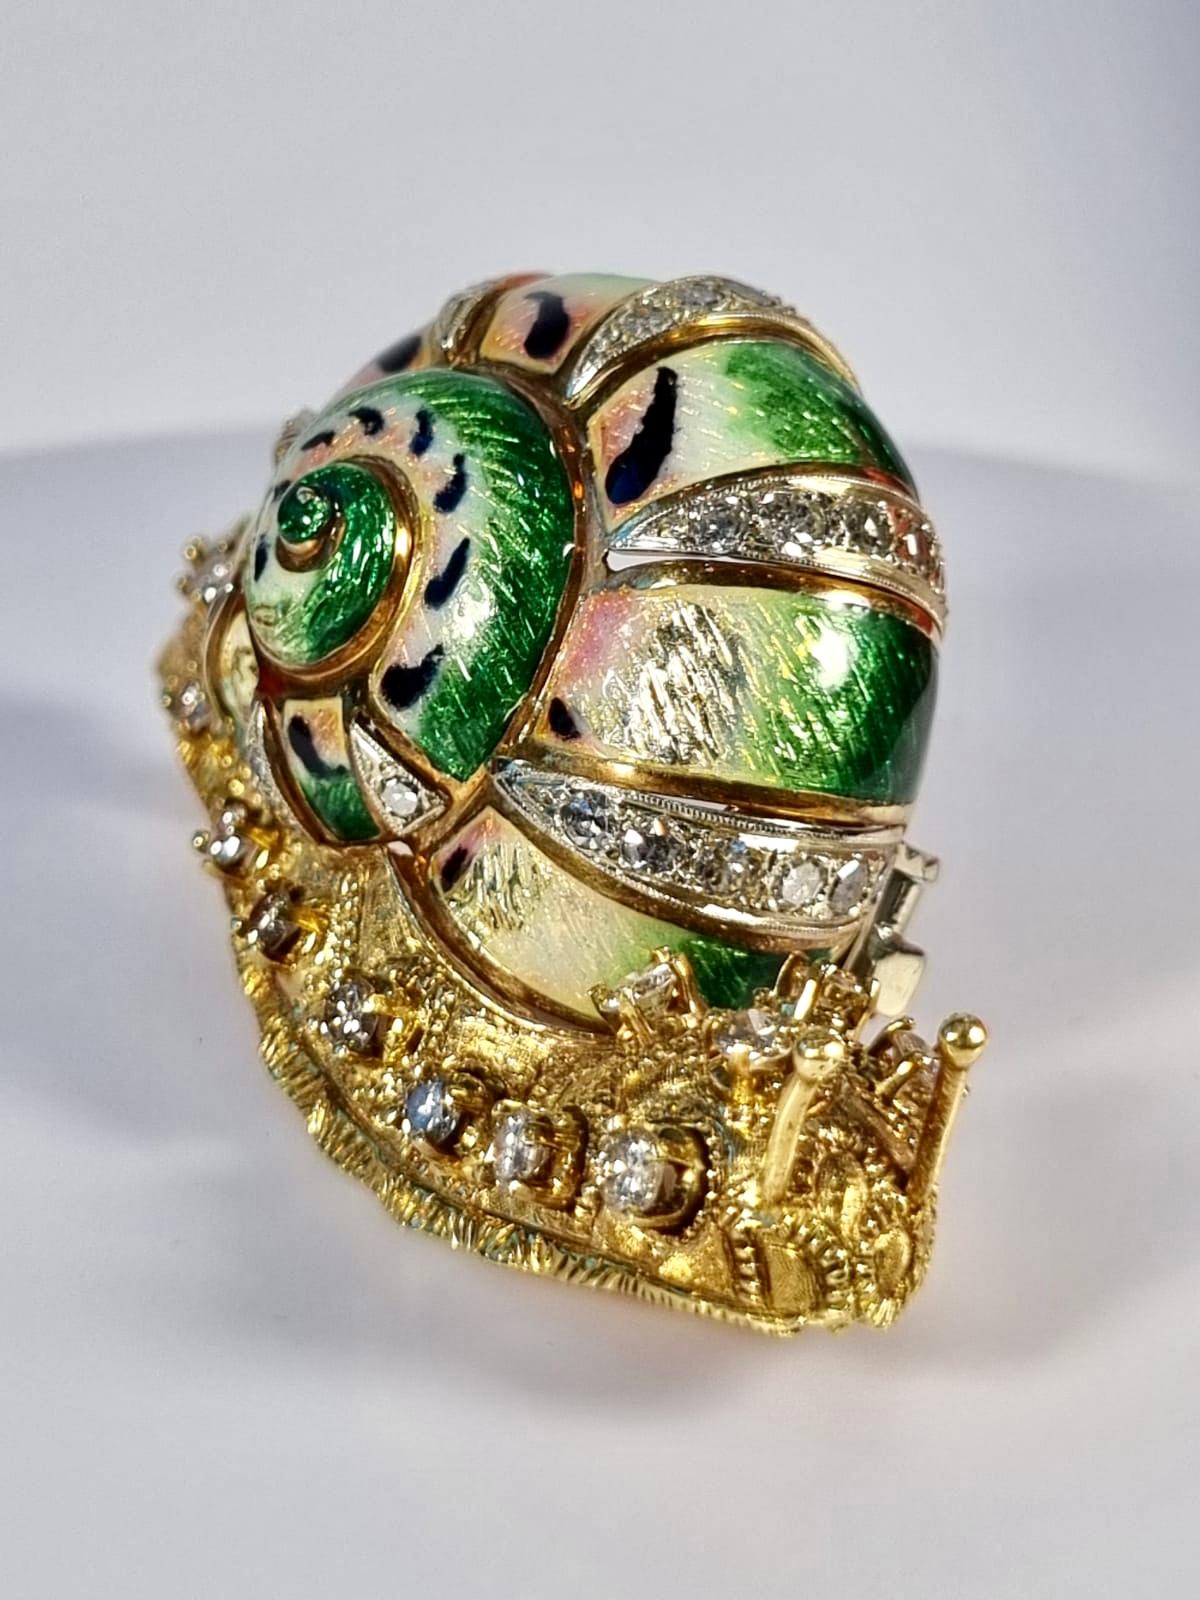 1960´s Italian Enamel Snail  in 18k gold and diamonds brooche 
44 brilliant diamonds that total 1.60ct
Weight 33.31 gr
Measures 60 x34 x20 mm 

READY TO SHIP
*Shipment of this piece is not affected by COVID-19. Orders welcome!

PRADERA is a second